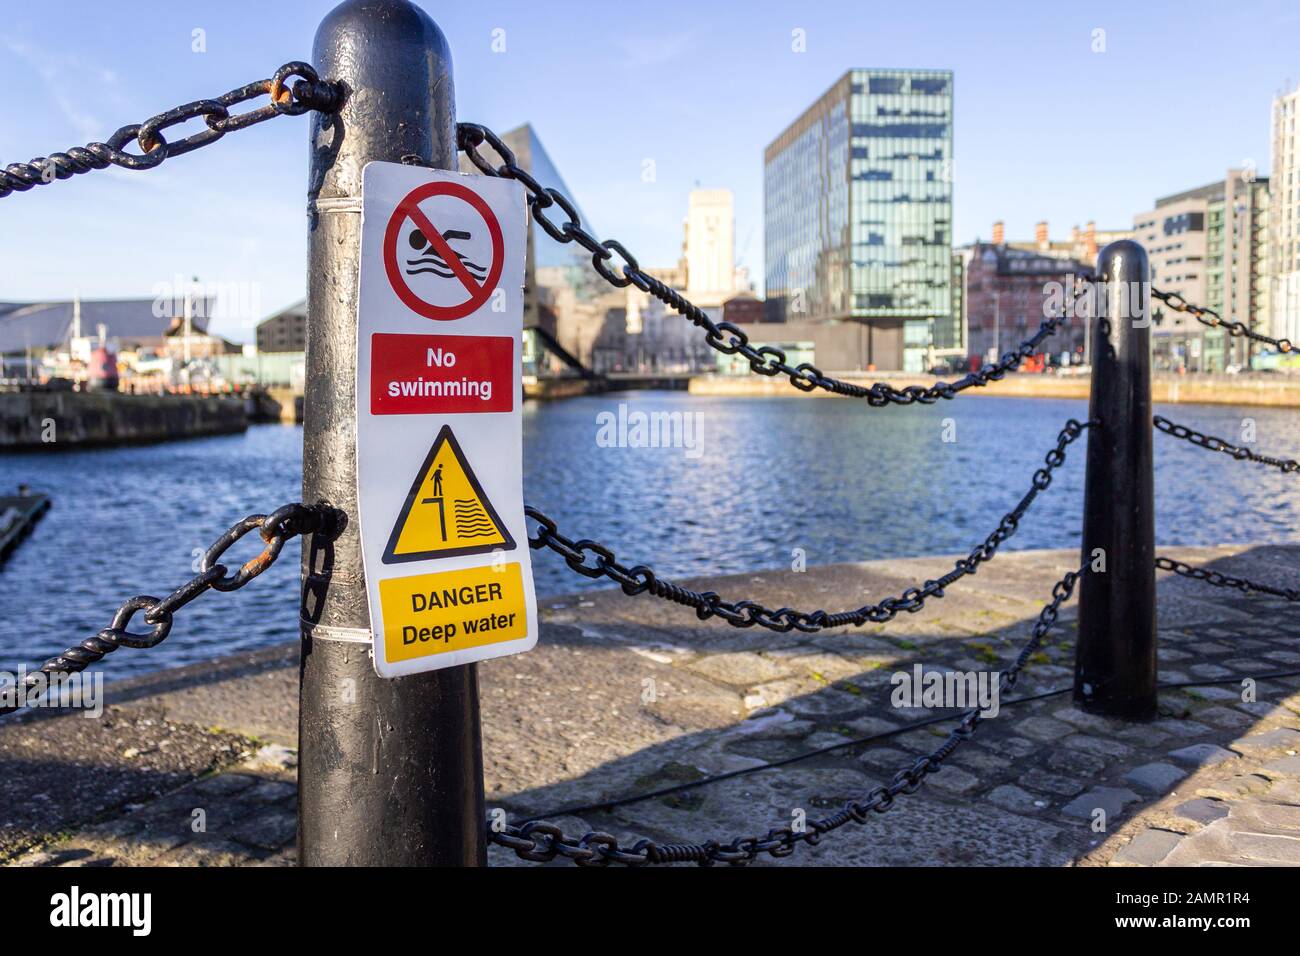 No swimming sign, Canning dock, Liverpool Stock Photo